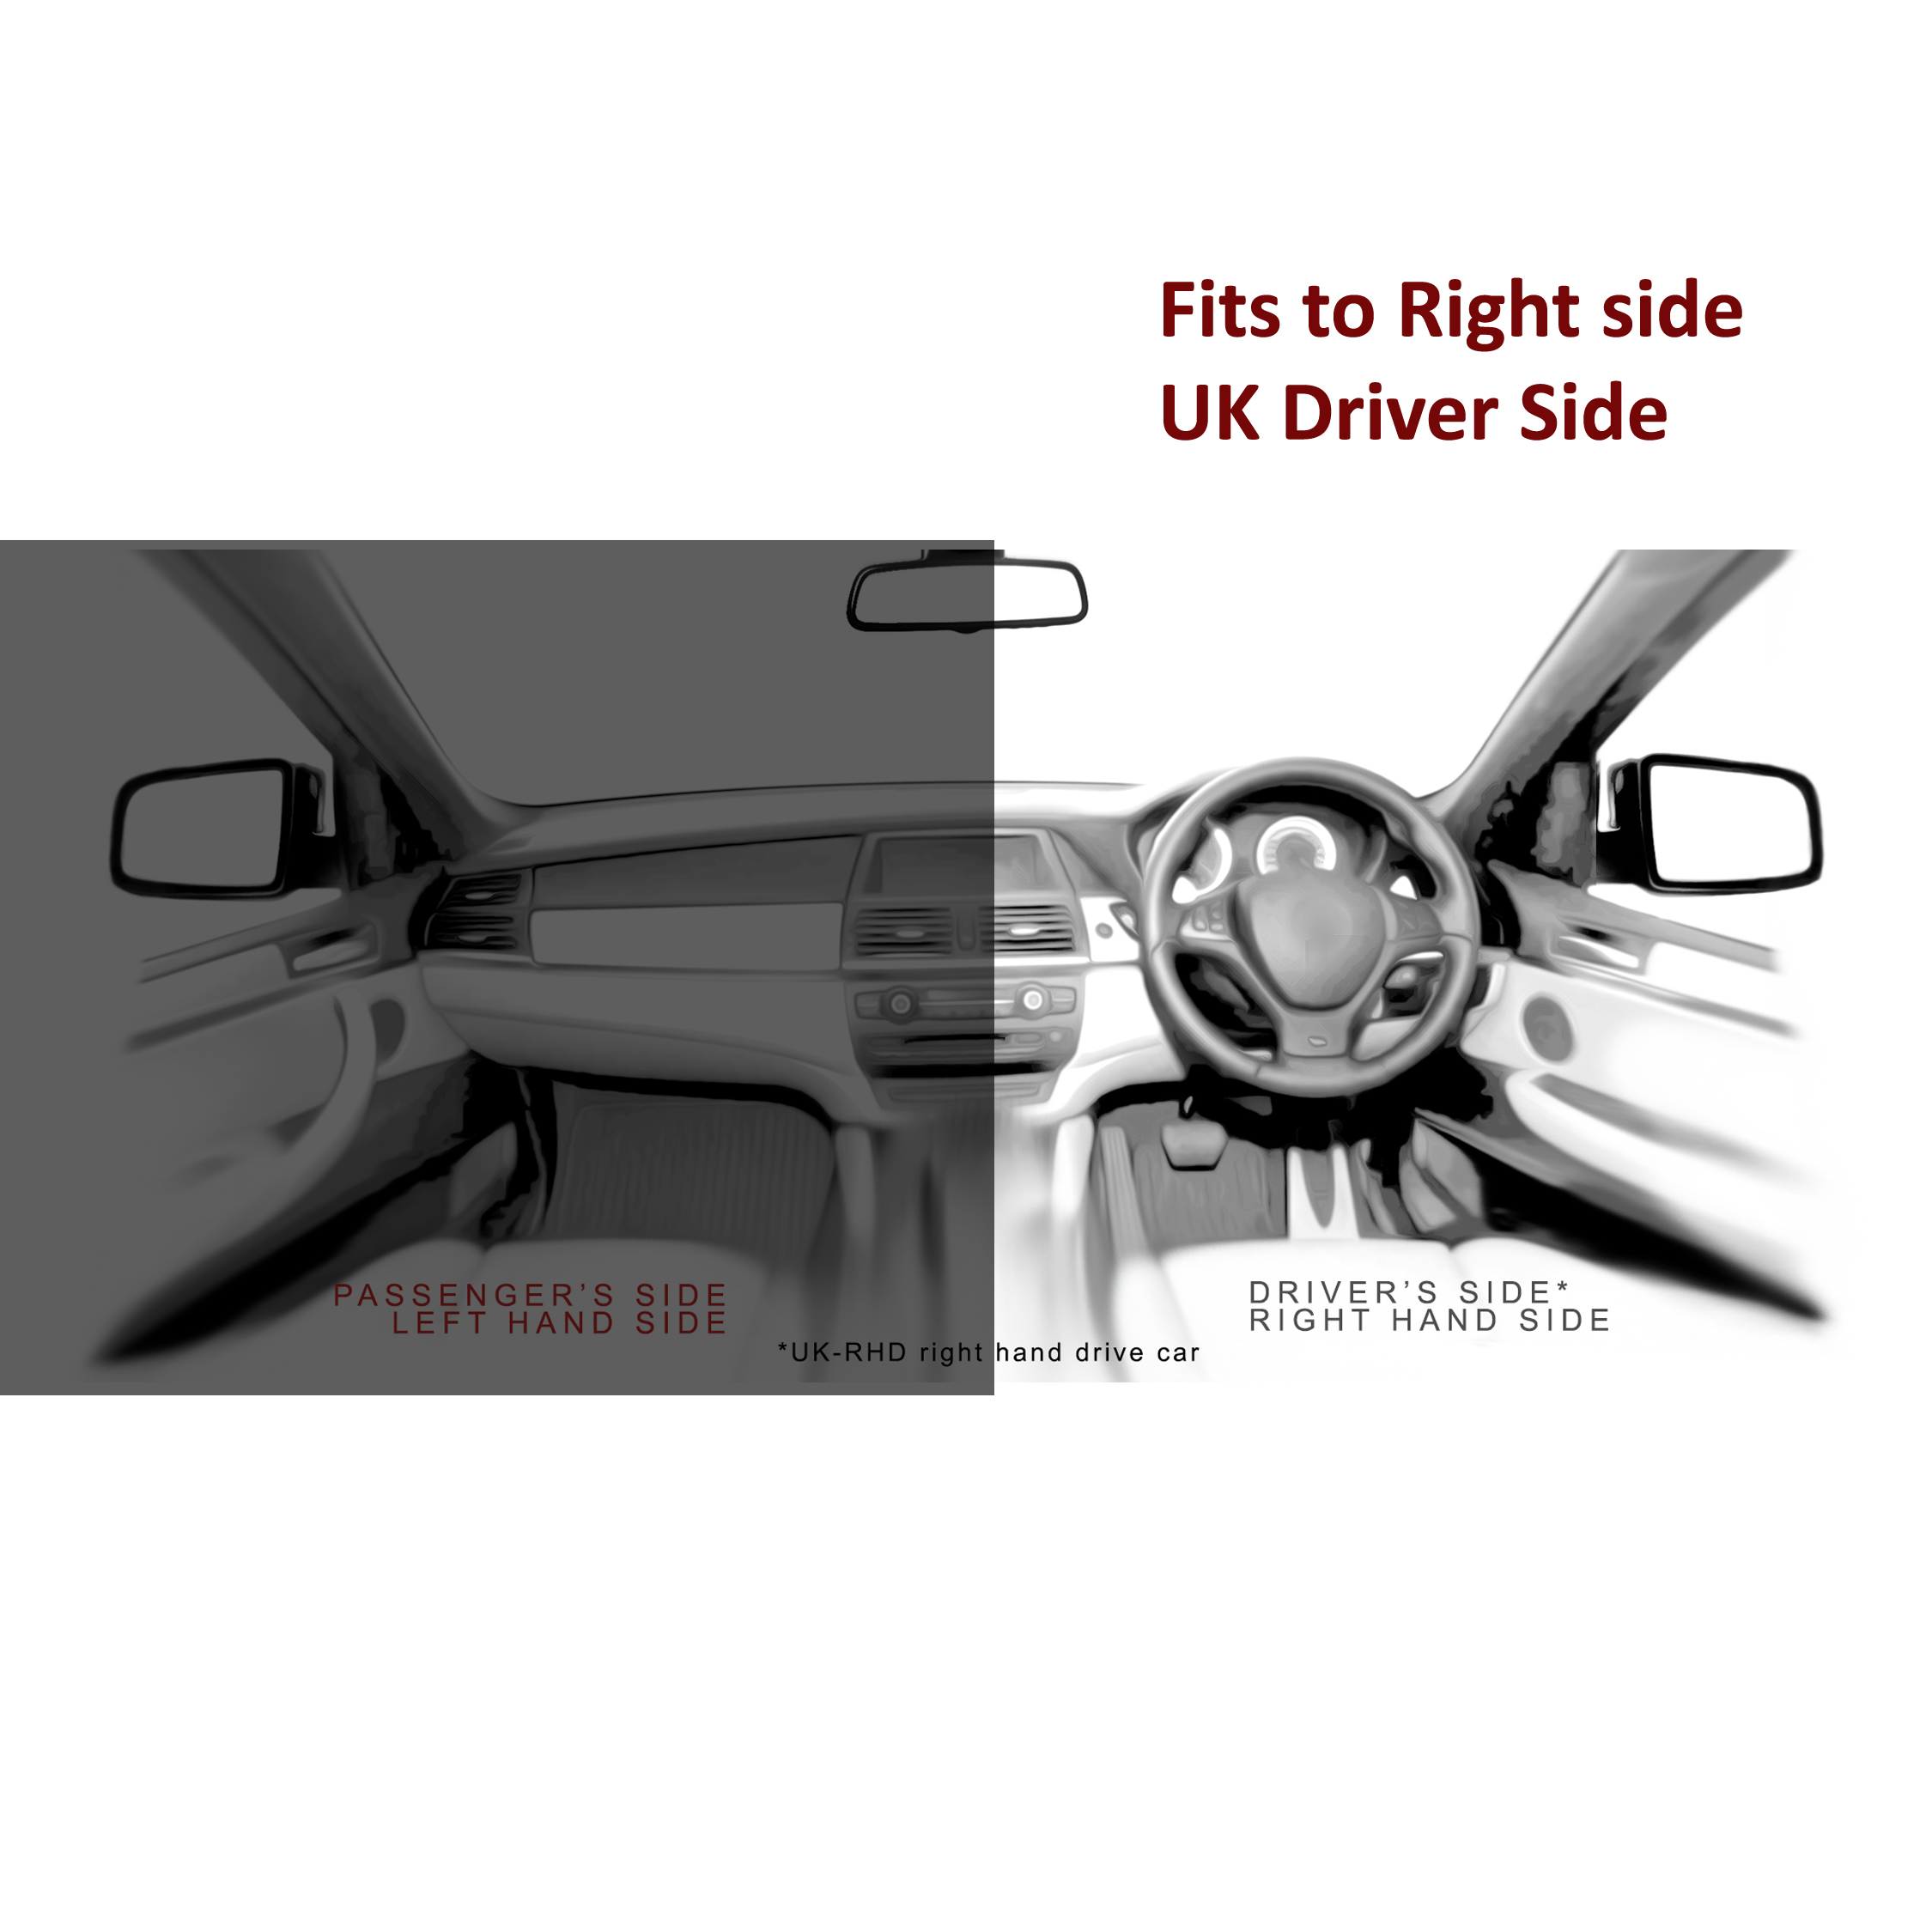 AUDI A4 Wing Mirror Cover RIGHT HAND ( UK Driver Side ) 2008 to 2009 – Wing Mirror Cover (BLACK )